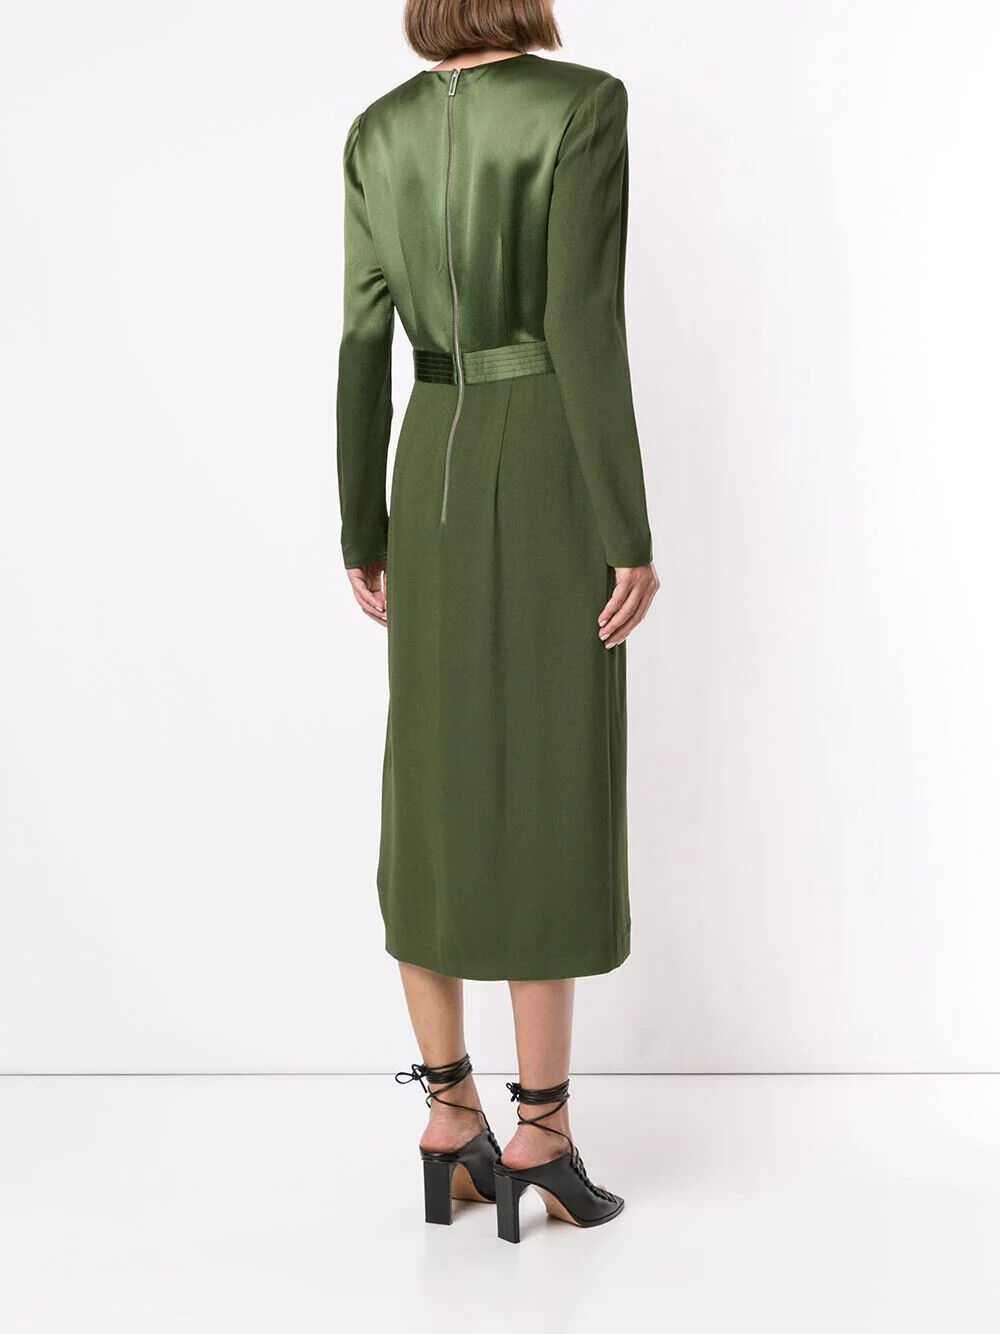 Pre-owned Dion Lee Pivot Drape Long Sleeve Dress Us 0 2 4 8 10 Rv$850 In Green